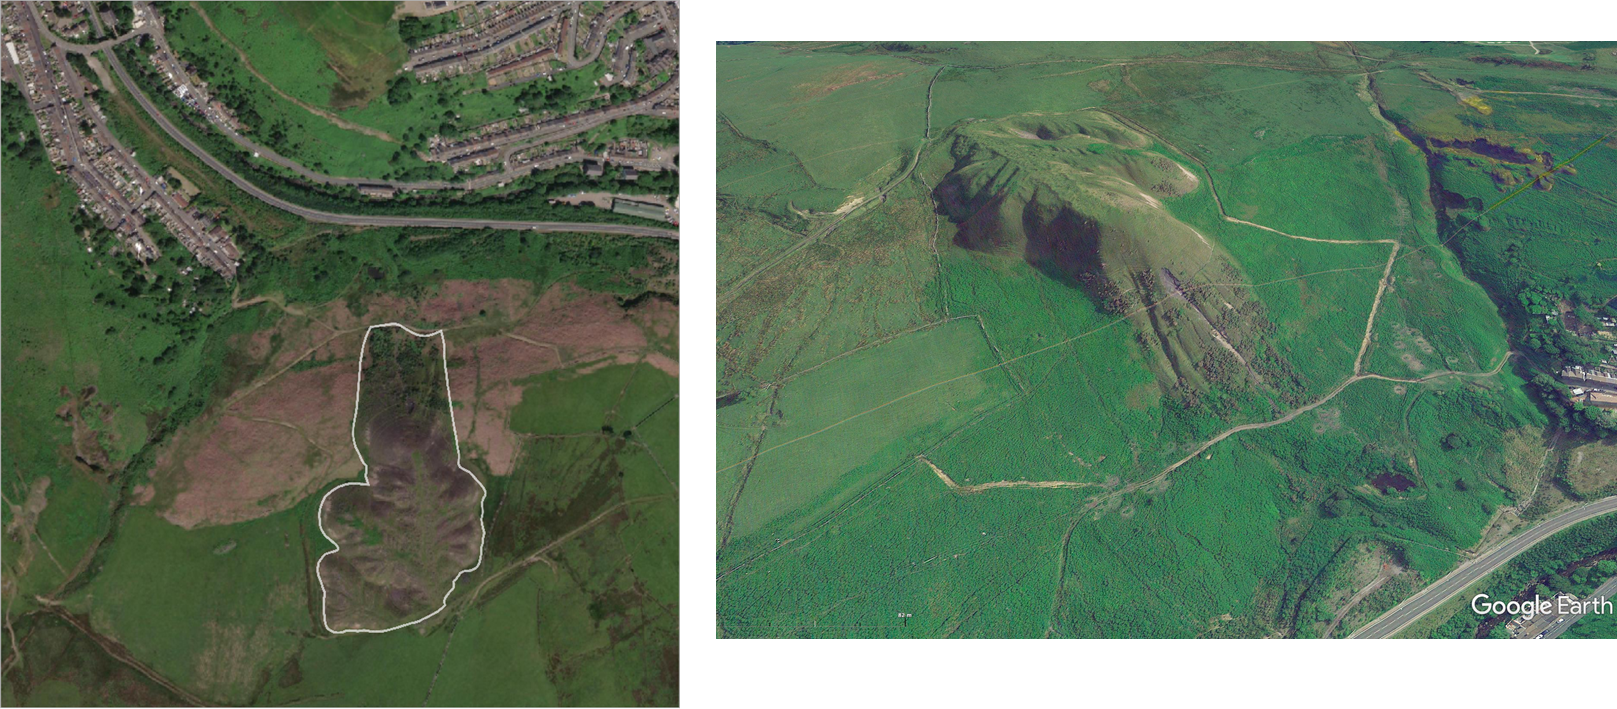 Left: Figure 1(a): Location of the Wattstown Standard Tip; Right: Figure 1(b): Image of the Wattstown Standard Tip from Google Earth, dated July 2013.